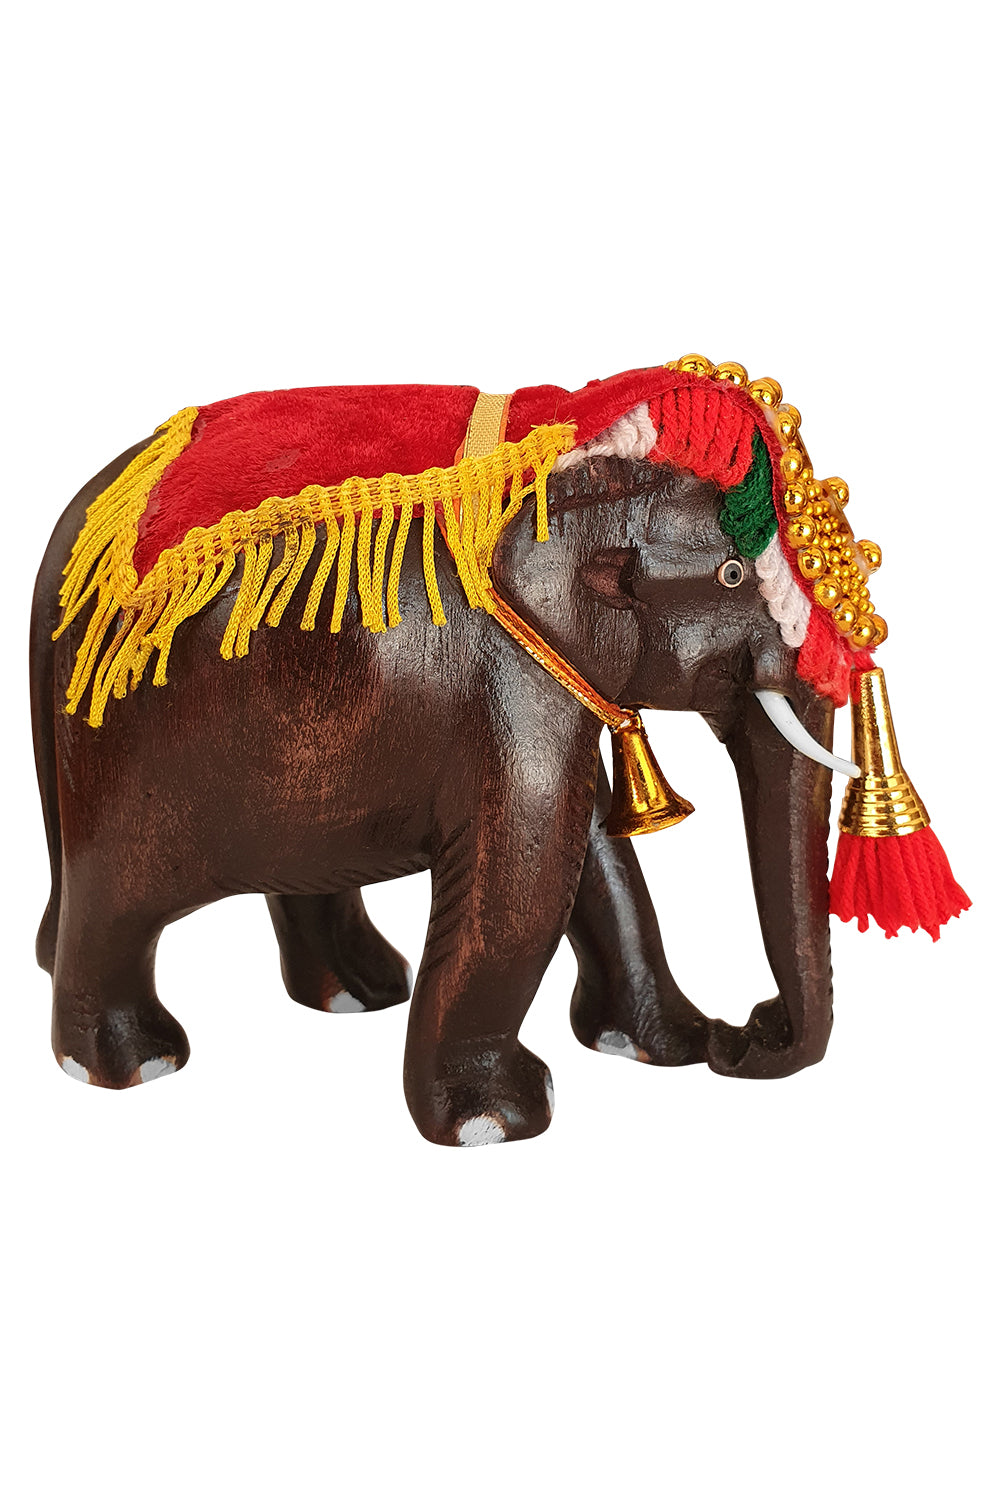 Southloom Handmade Temple Elephant Handicraft (Carved from Mahogany Wood) 5 Inches